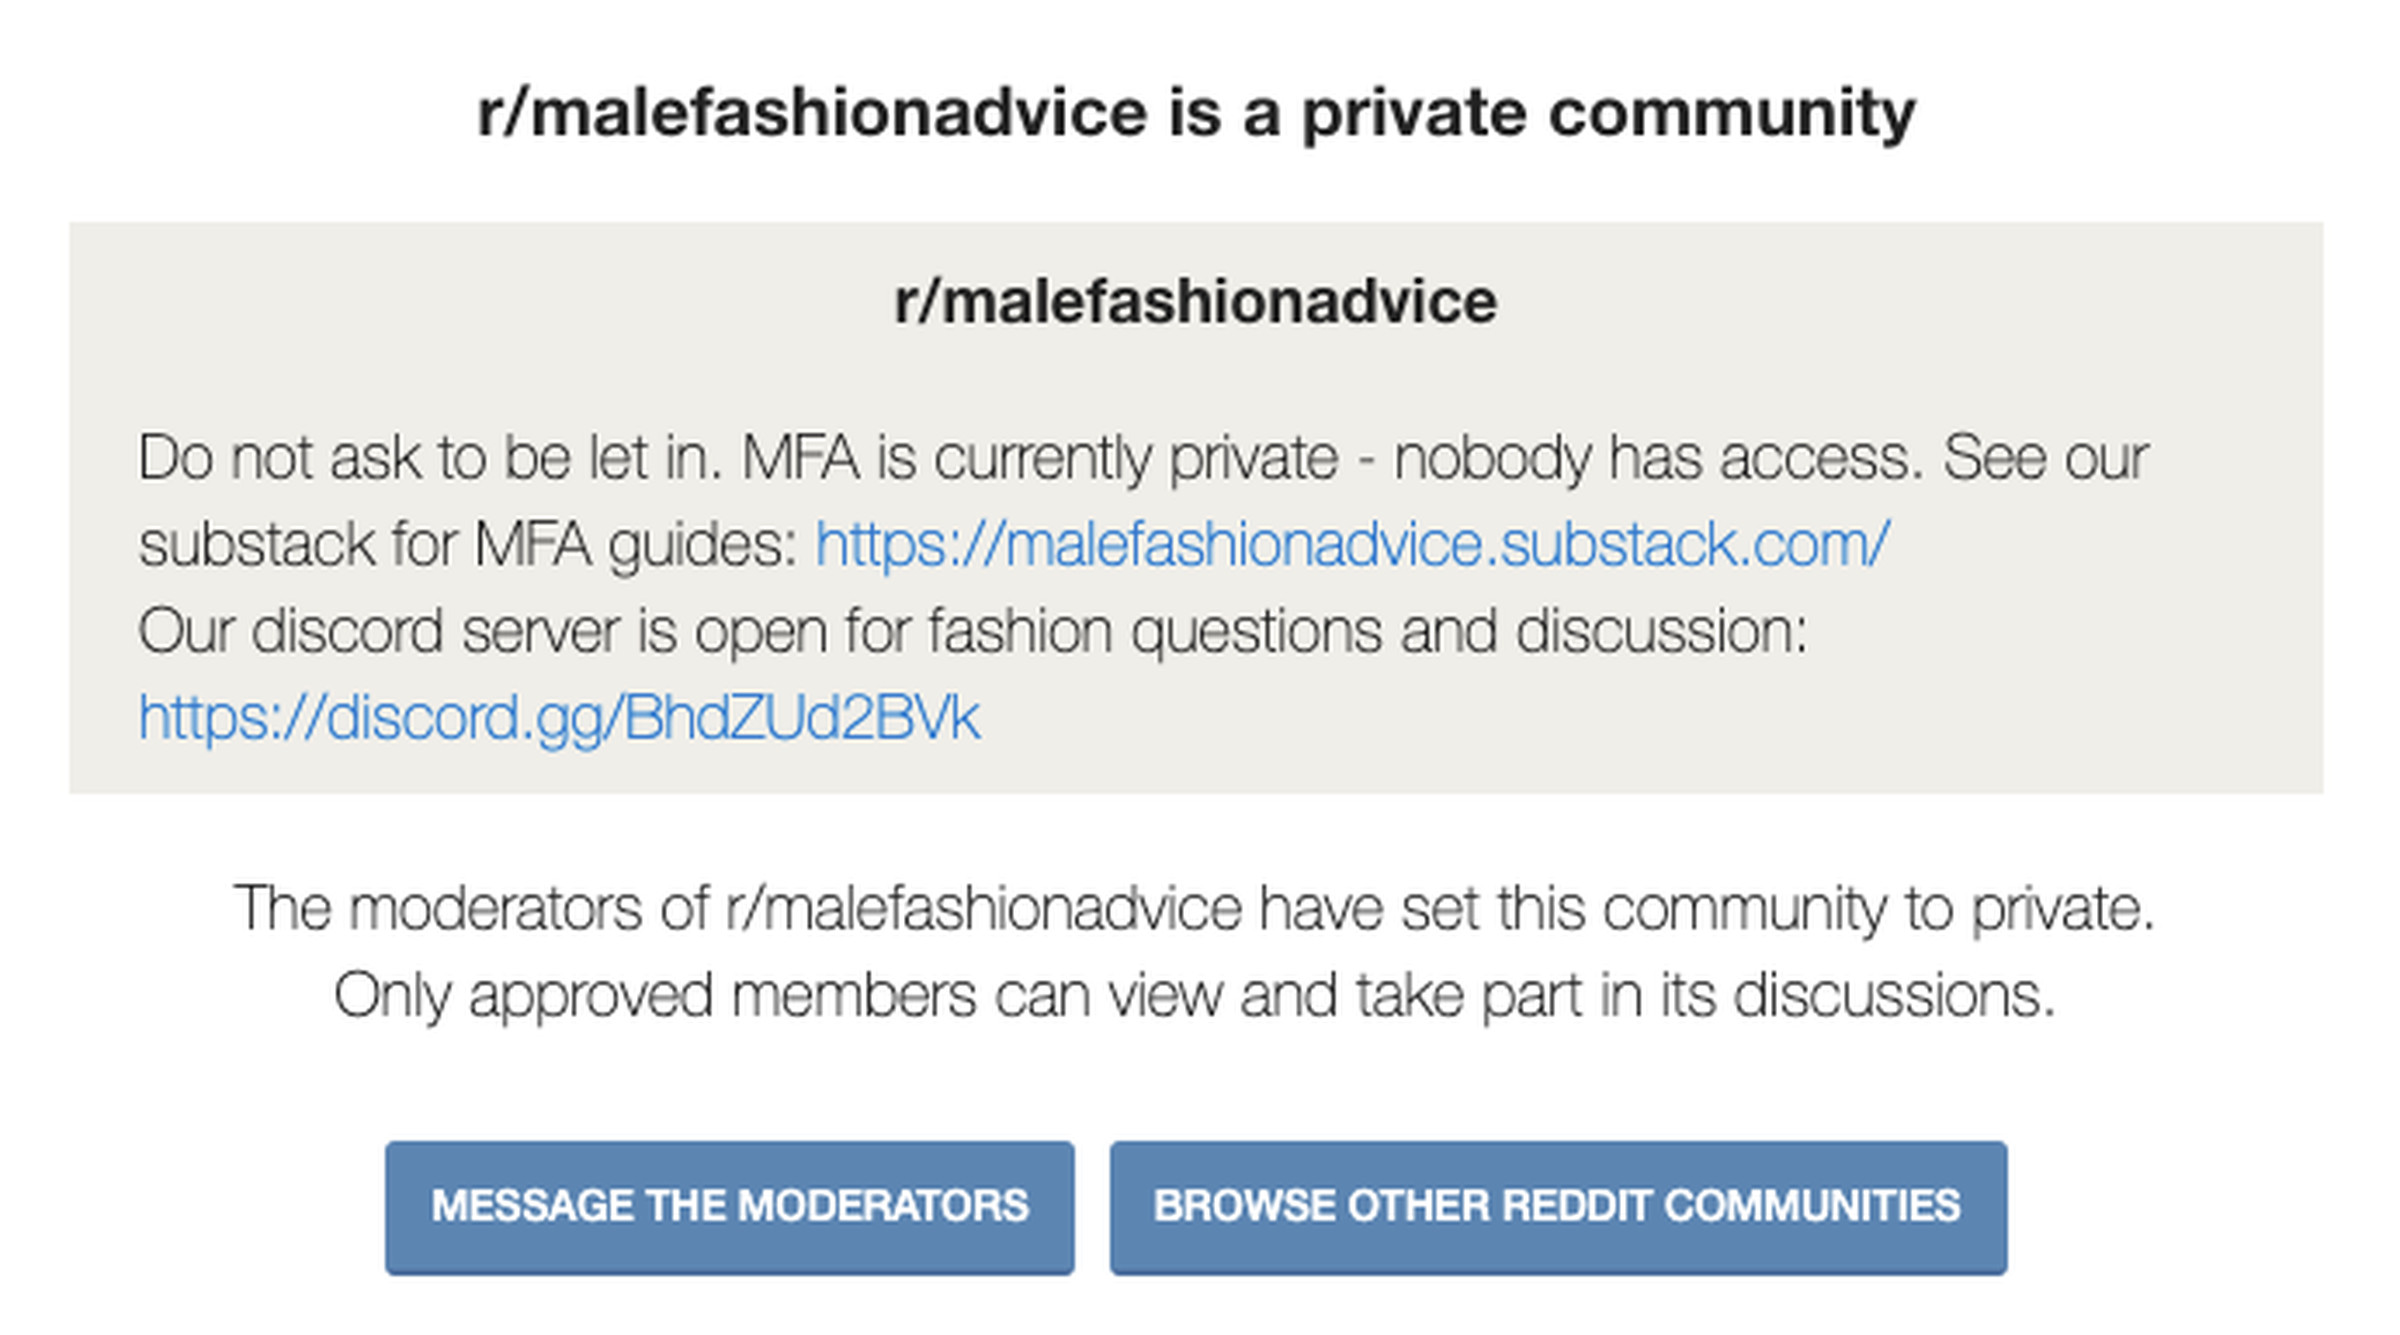 A screenshot of the message when you try to visit r/malefashionadvice.